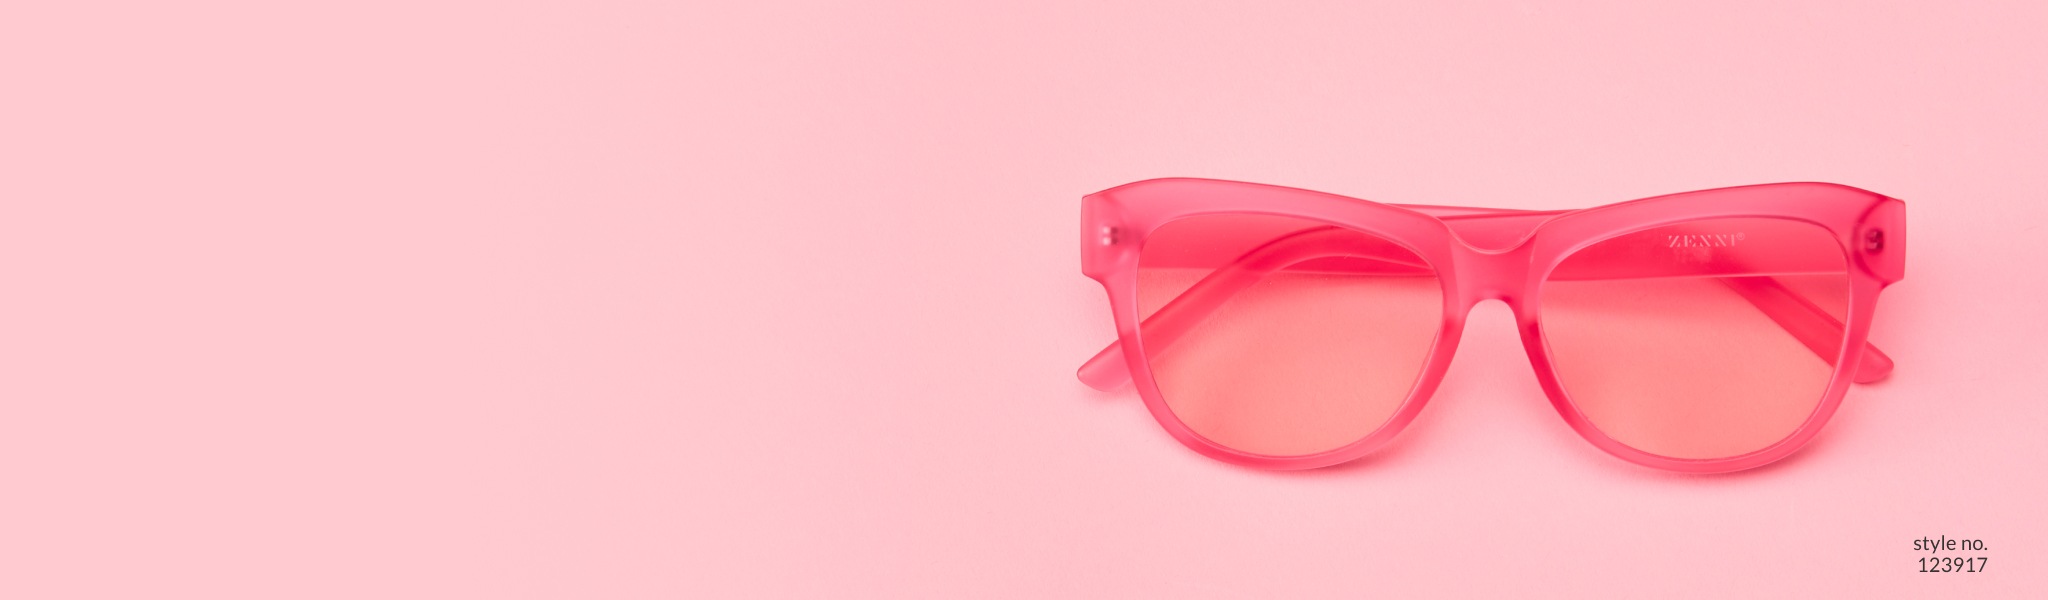 Image of Zenni pink cat-eye glasses #123917 on a pink background.